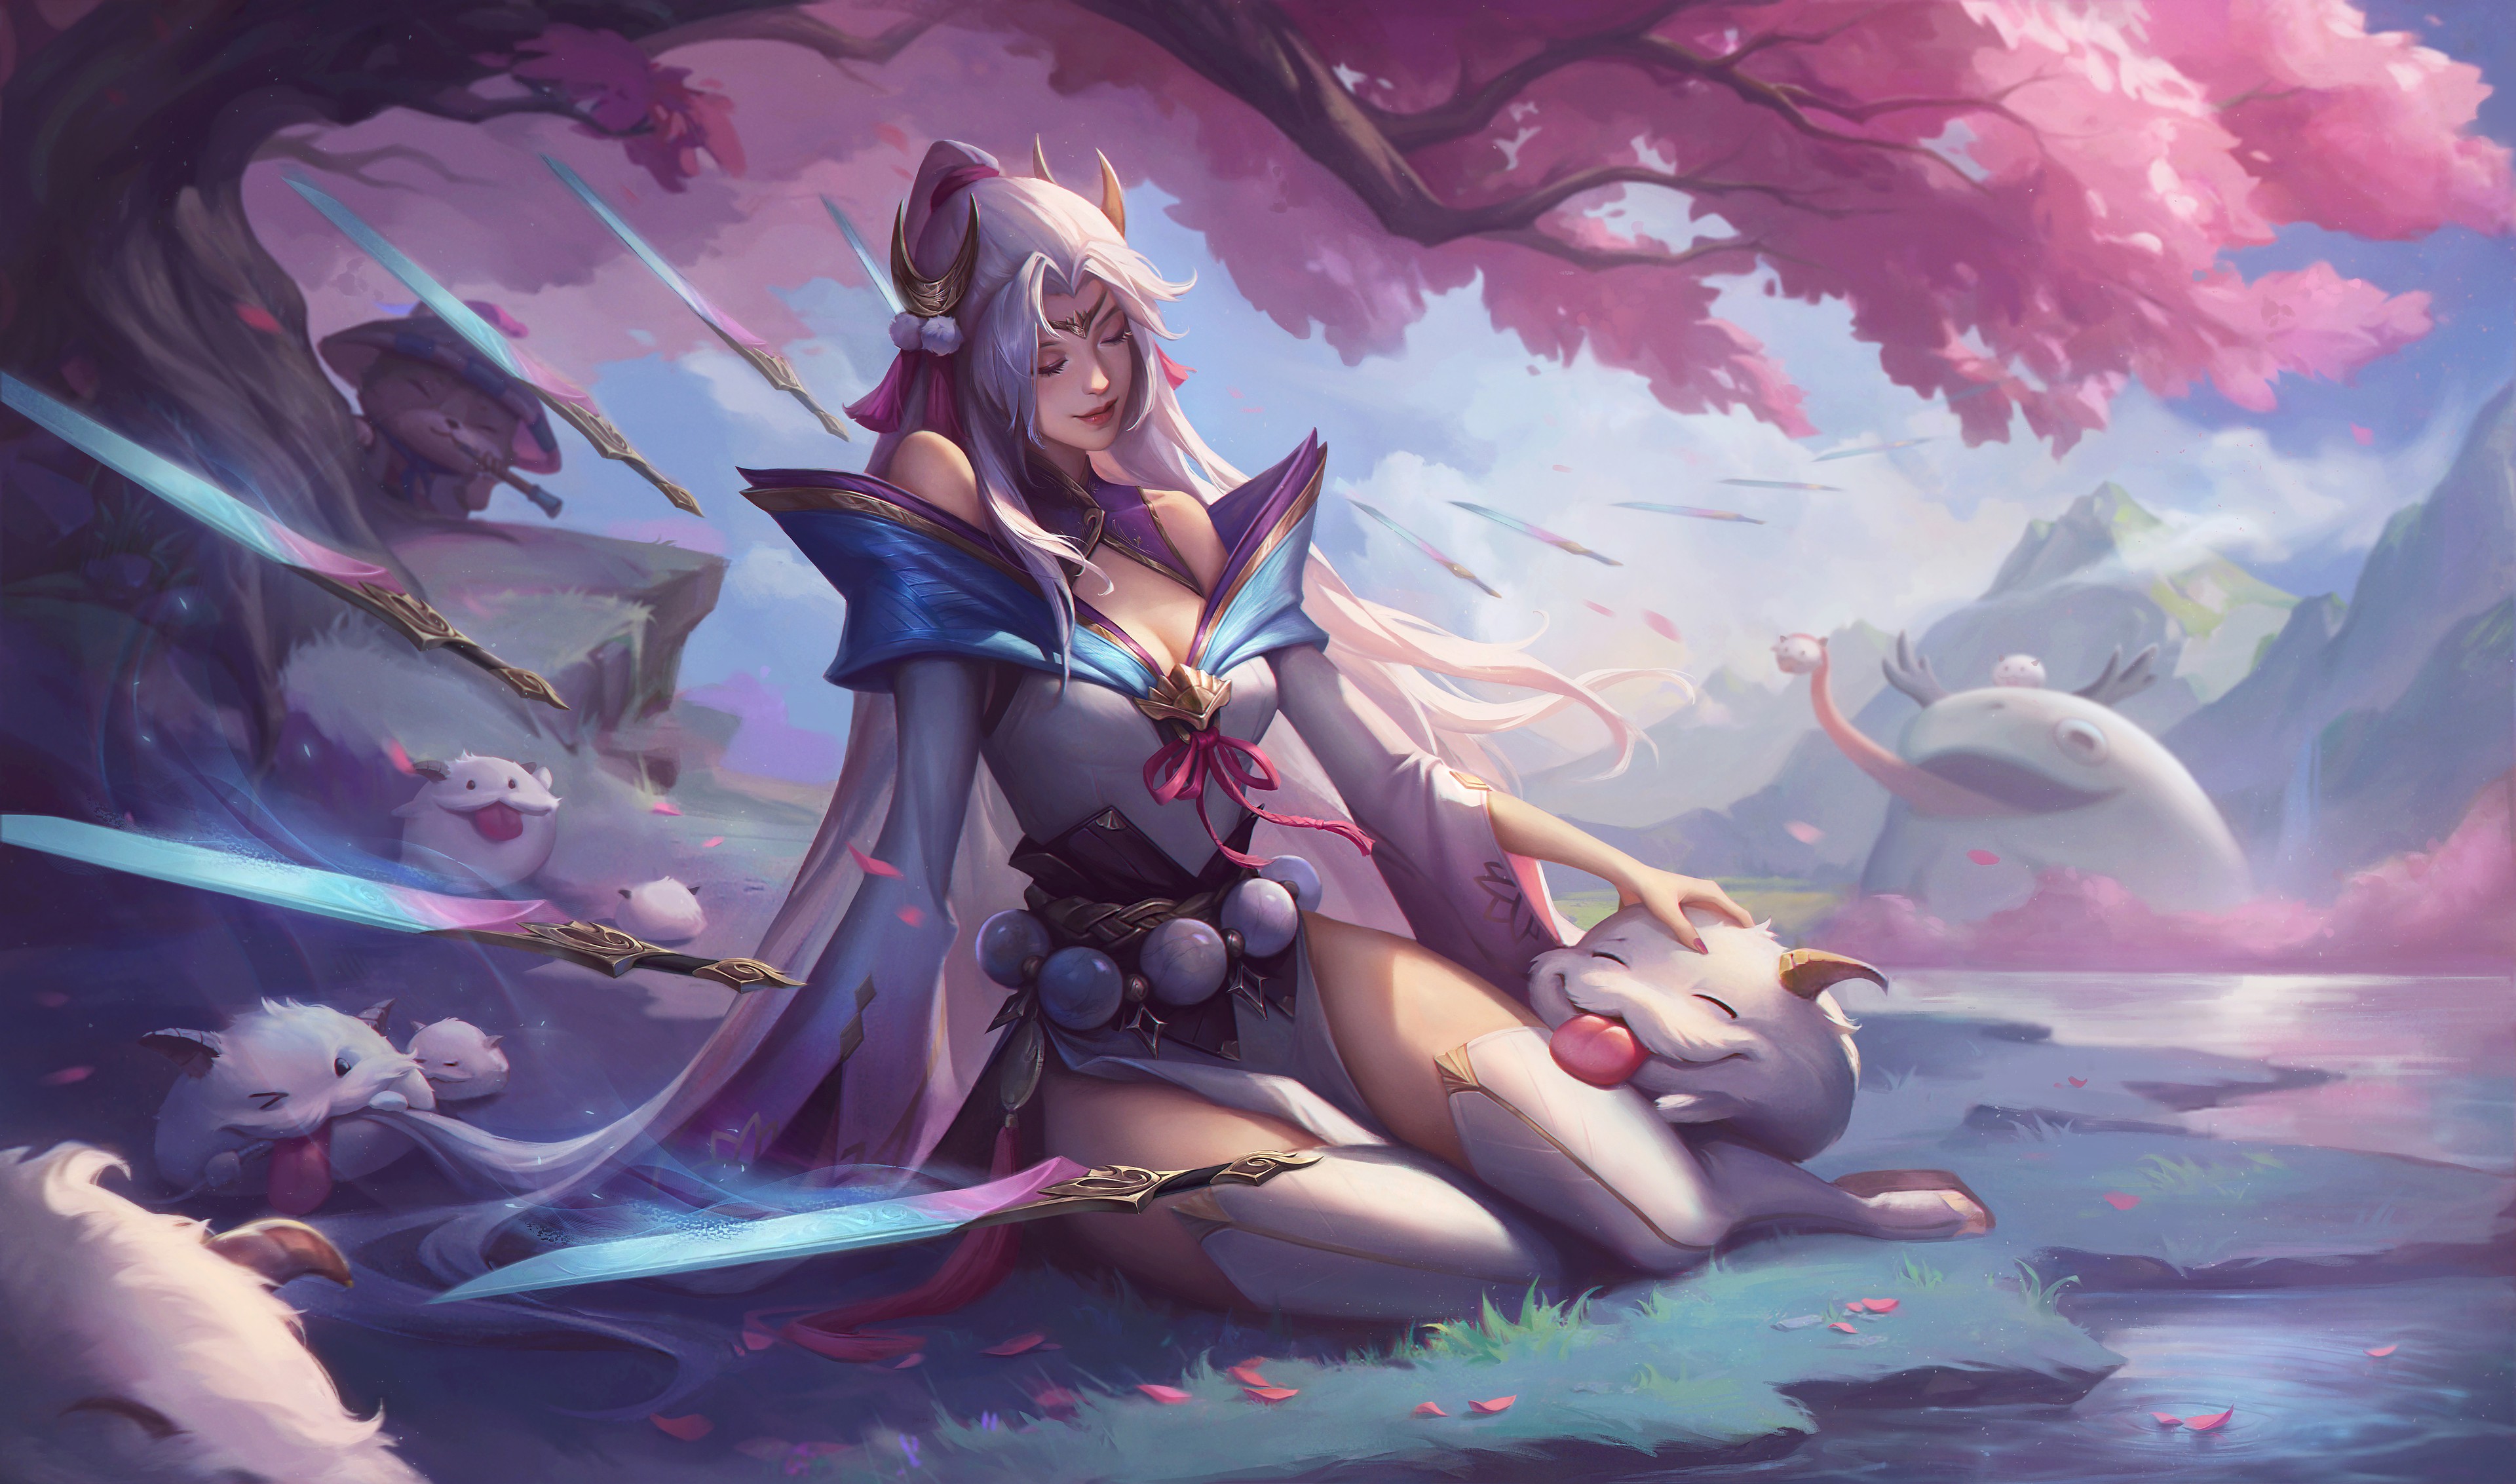 Anime 3840x2265 Irelia (League of Legends) anime girls animals Pink-Pink-Punk women video games video game girls PC gaming video game characters stockings long hair sword women with swords girls with guns video game art